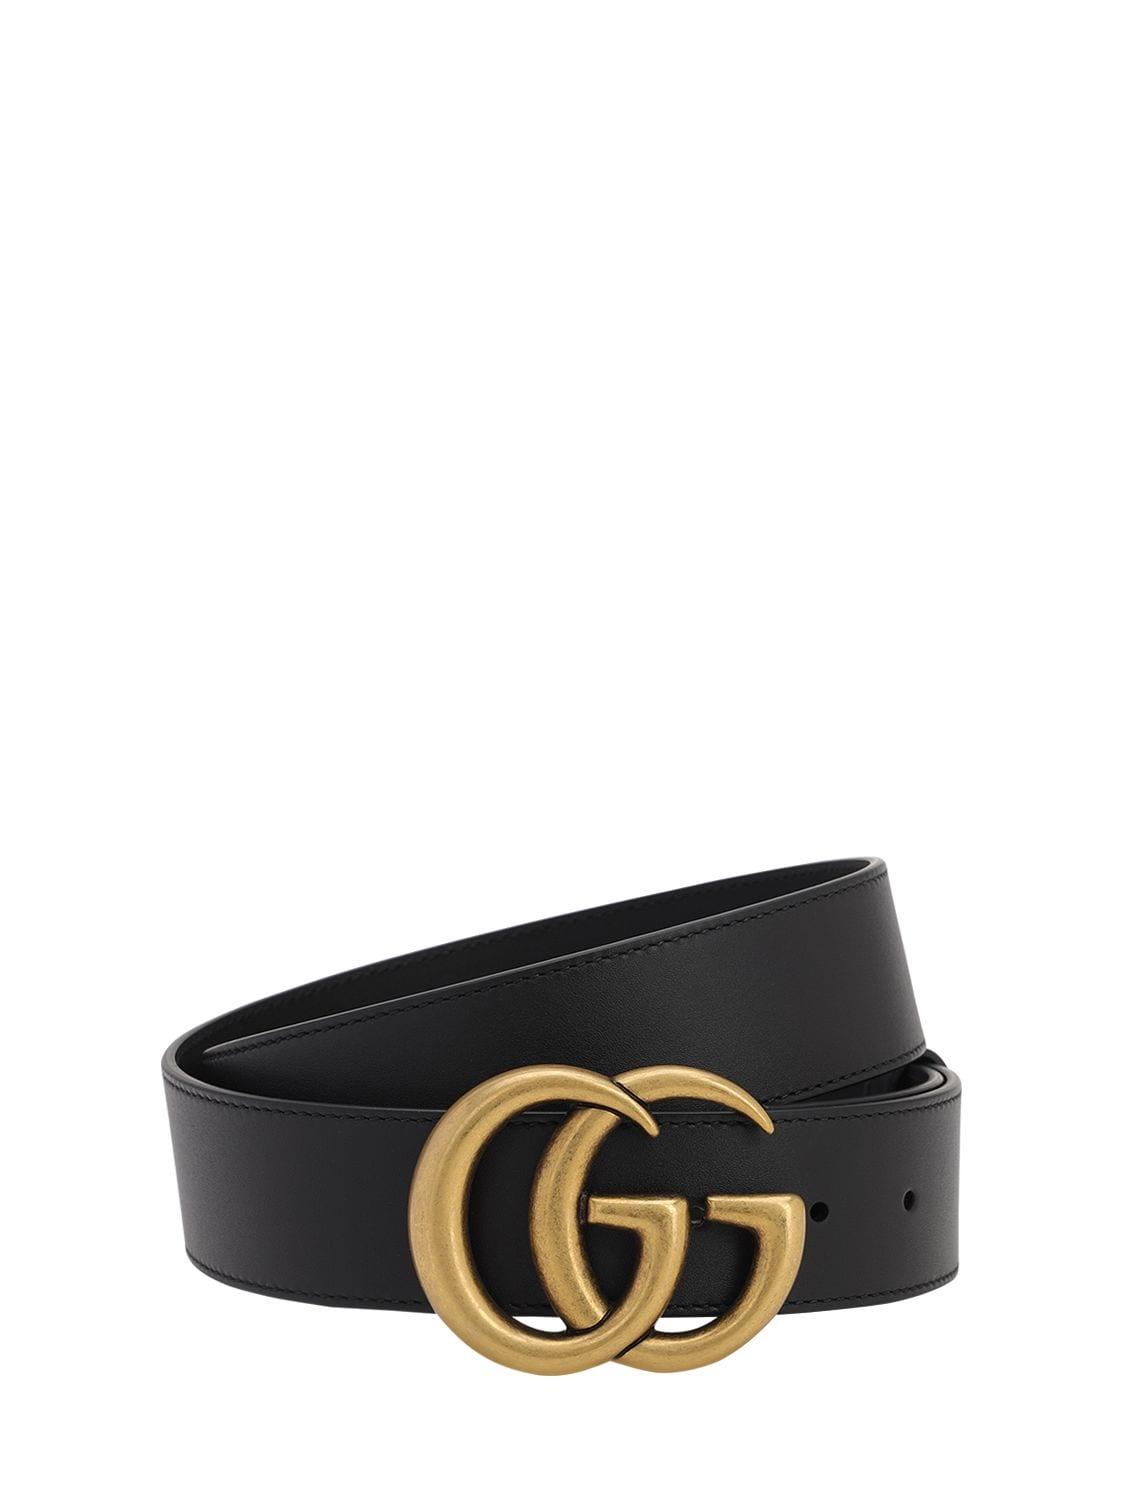 Gucci Double G Buckle Leather Belt in White (Black) - Save 20% - Lyst